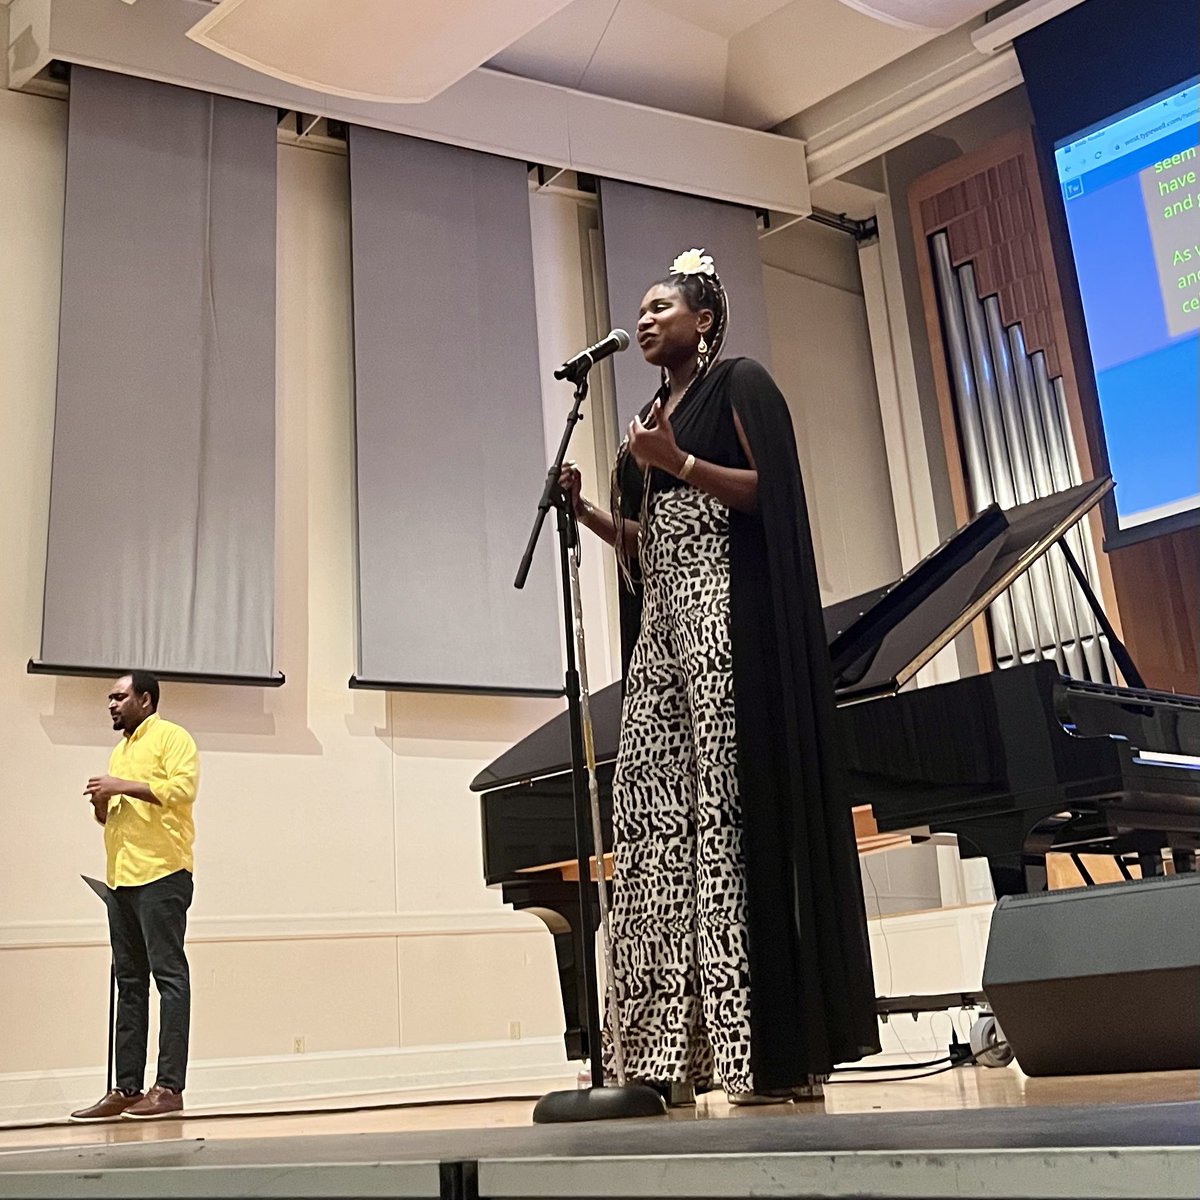 Back to back college keynote performances! Shoutout to the @Georgetown Disability Cultural Center and the @Uoregon Accessible Education and Black Cultural Centers for having me! 

#Keynote #Performance #DisabilityCulture #BlackHistoryMonth